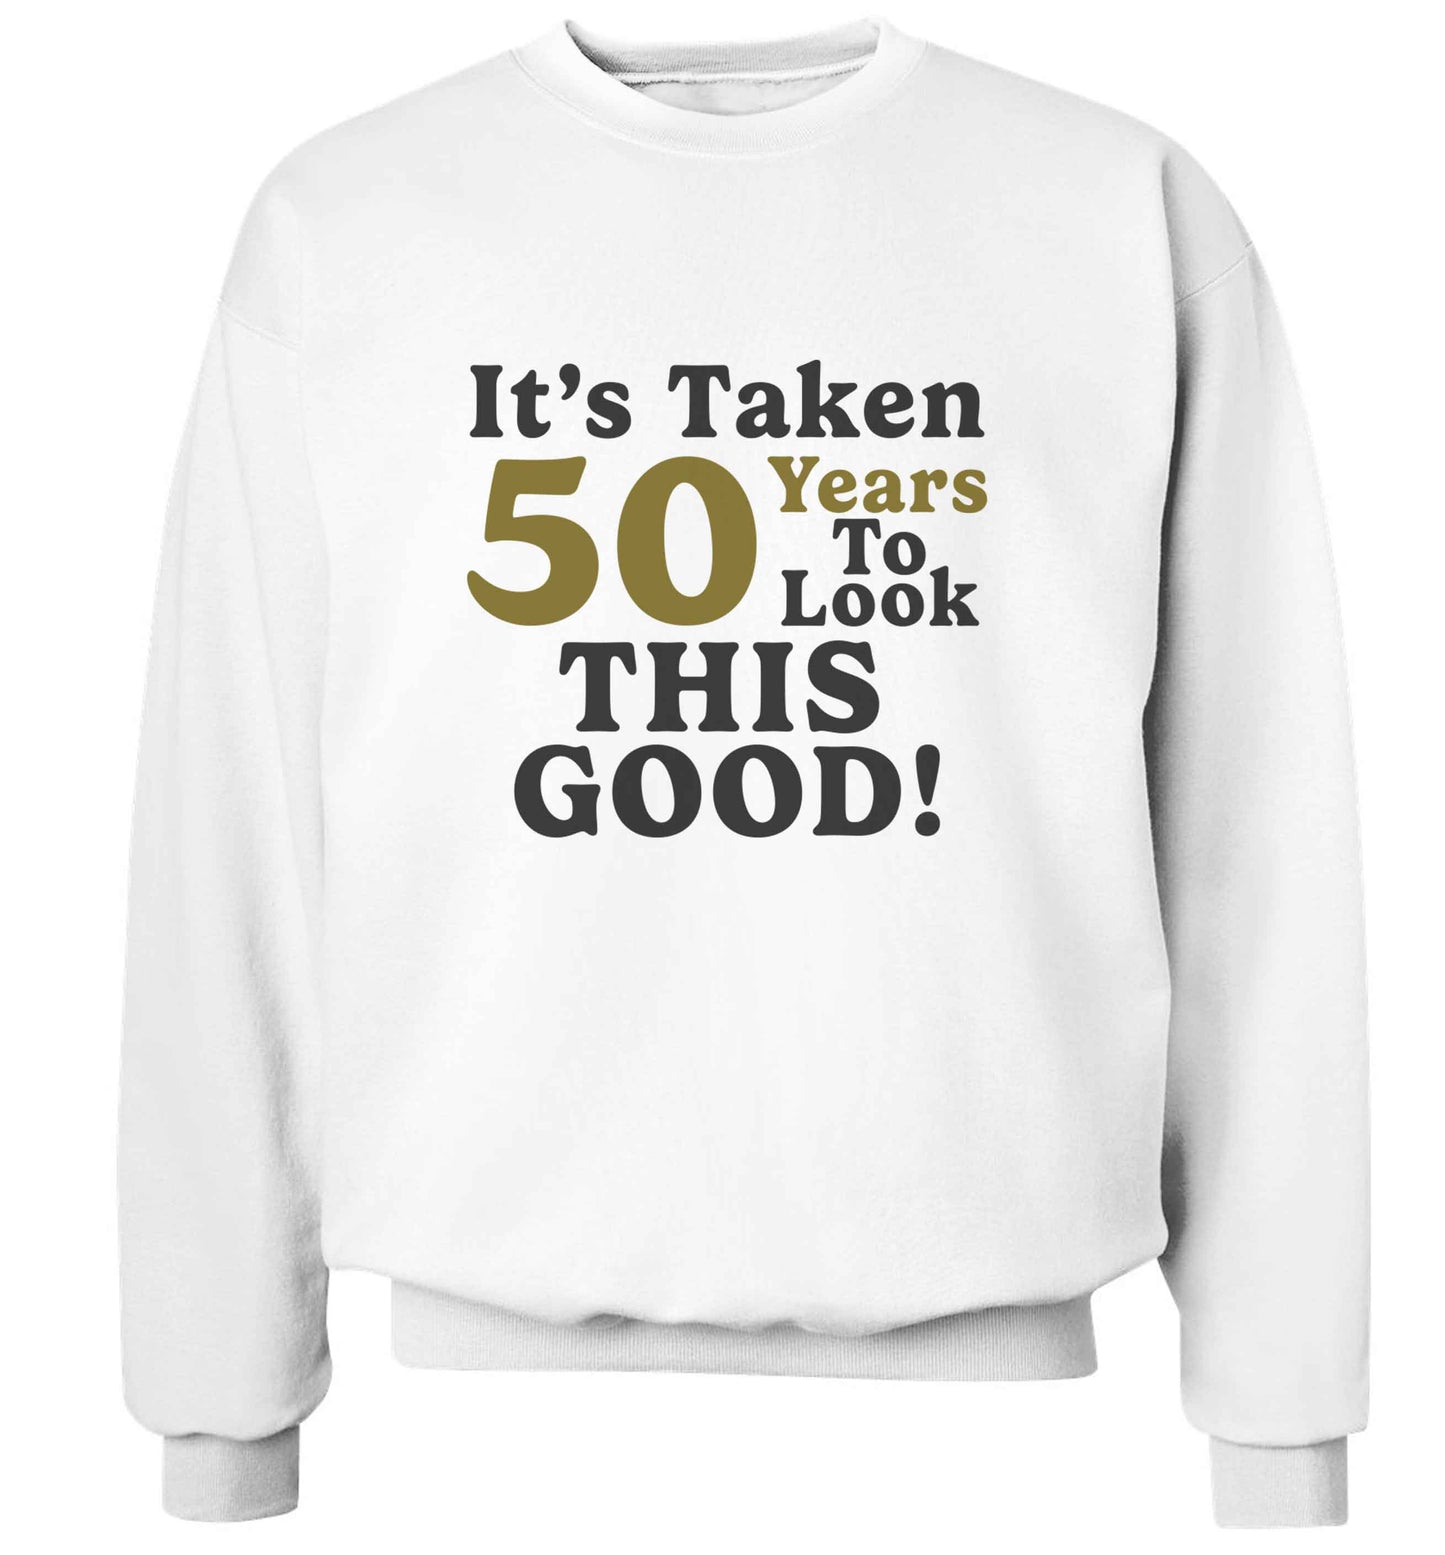 It's taken 50 years to look this good! adult's unisex white sweater 2XL